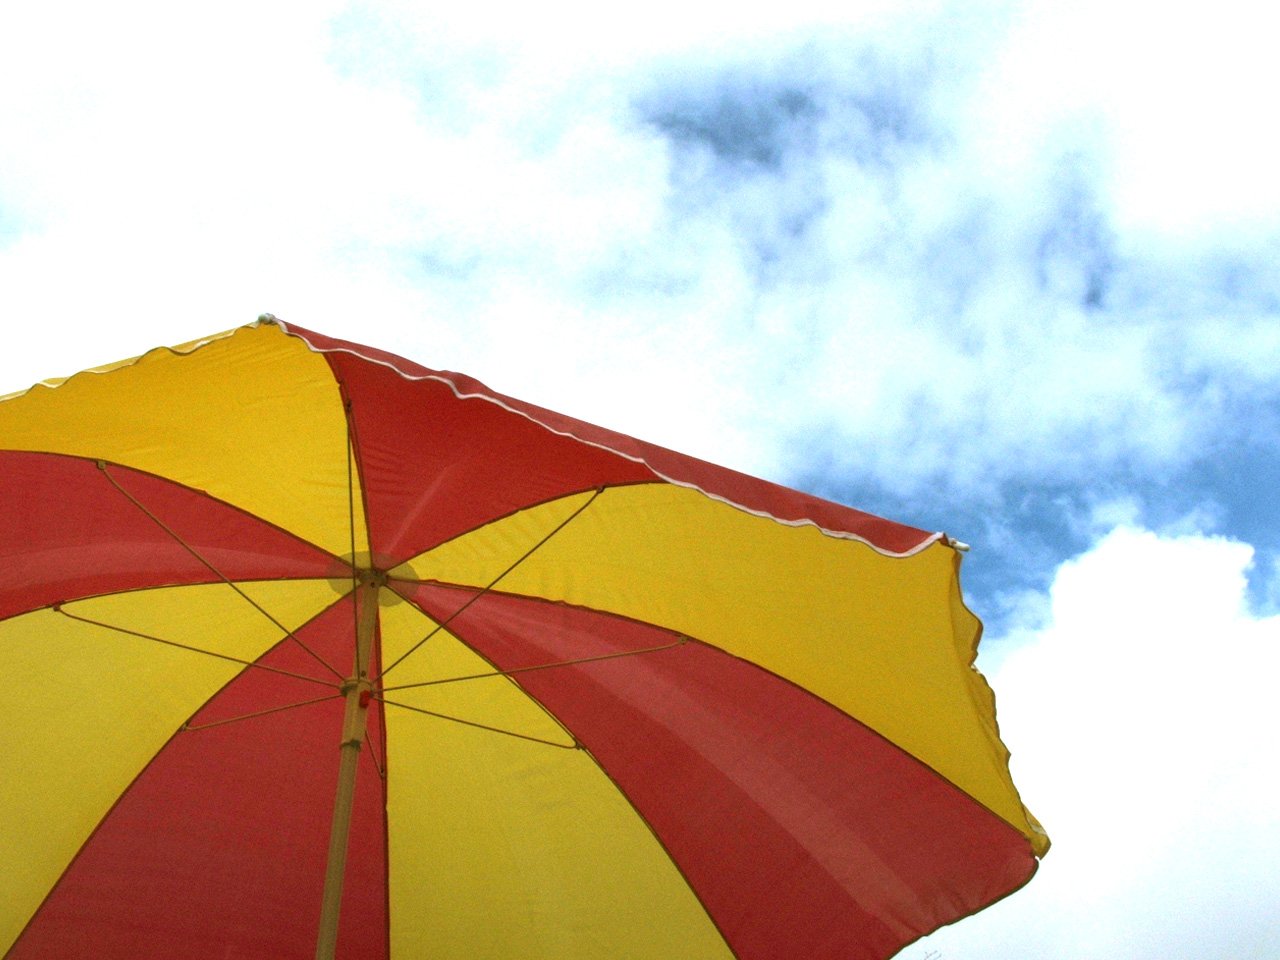 an umbrella that is yellow and red with clouds in the background